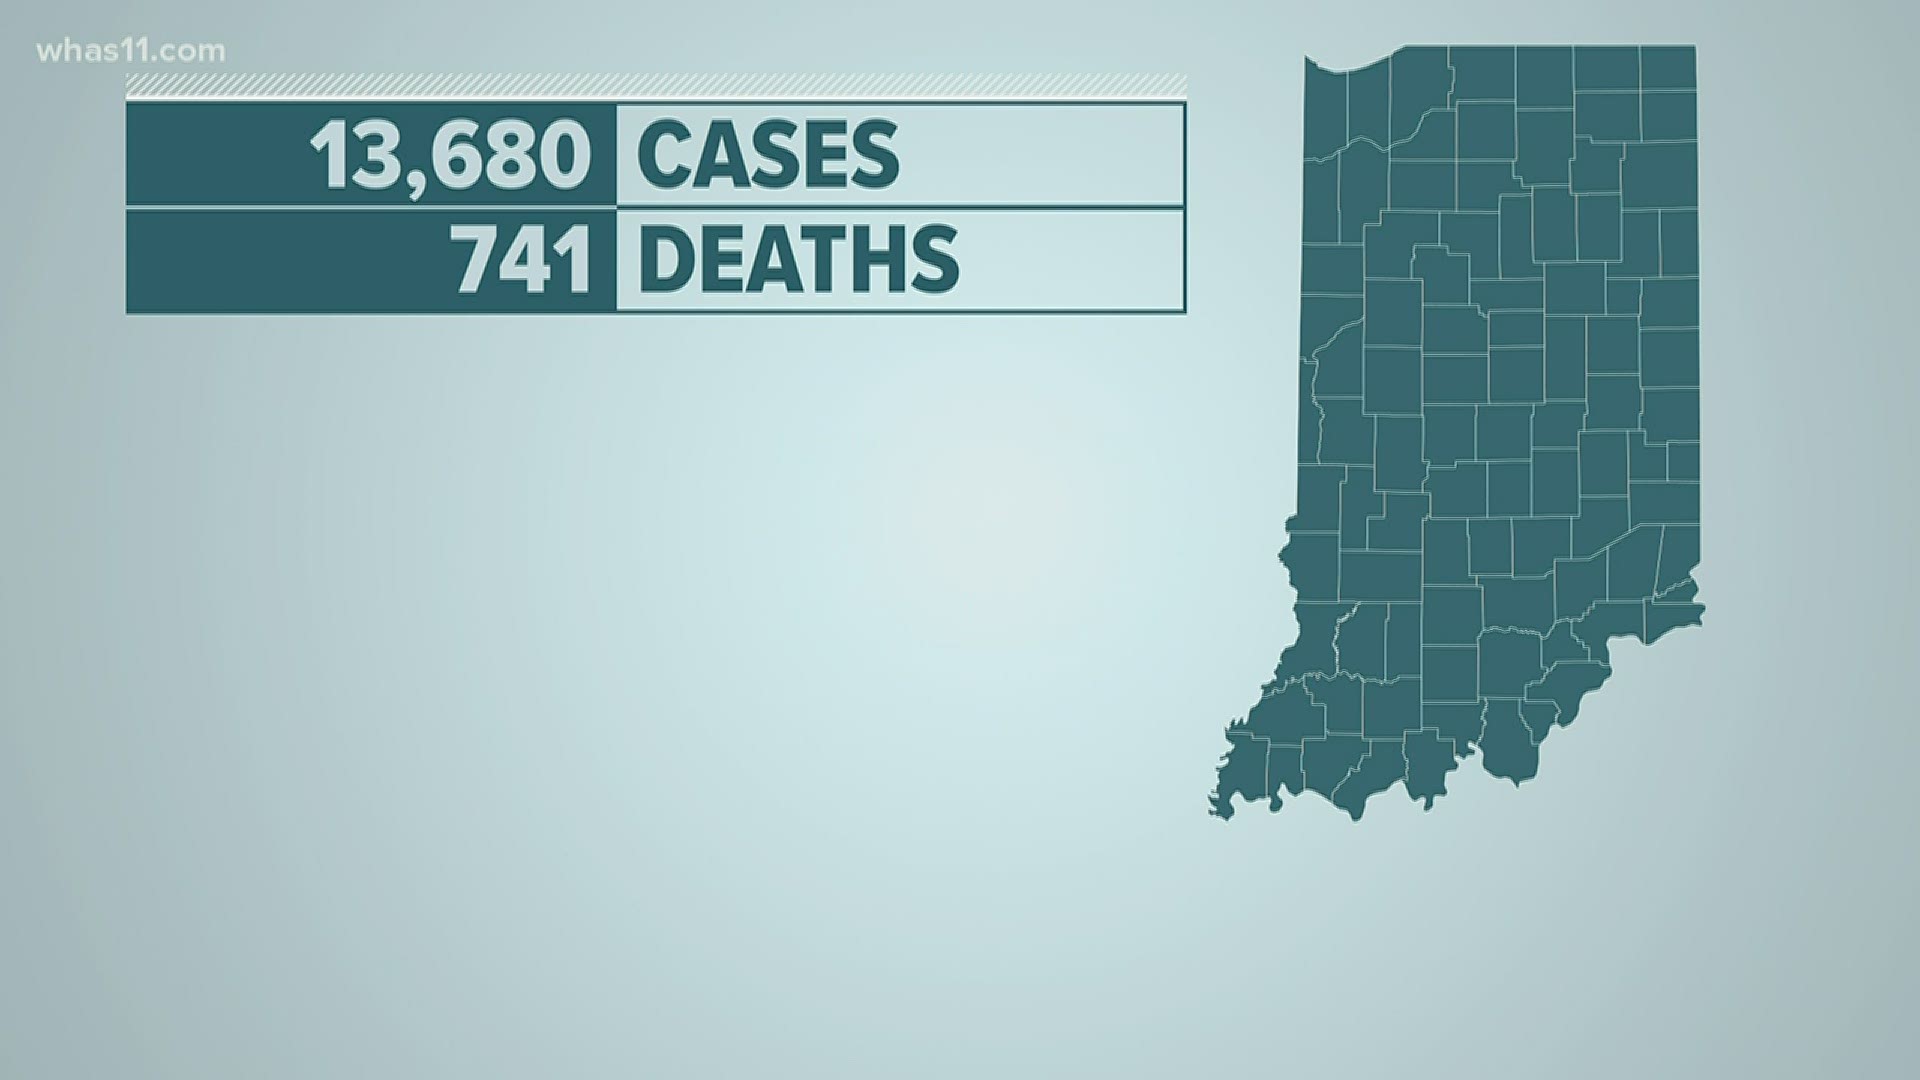 The Indiana State Department of Health reported 656 new confirmed cases of COVID-19 on Friday.